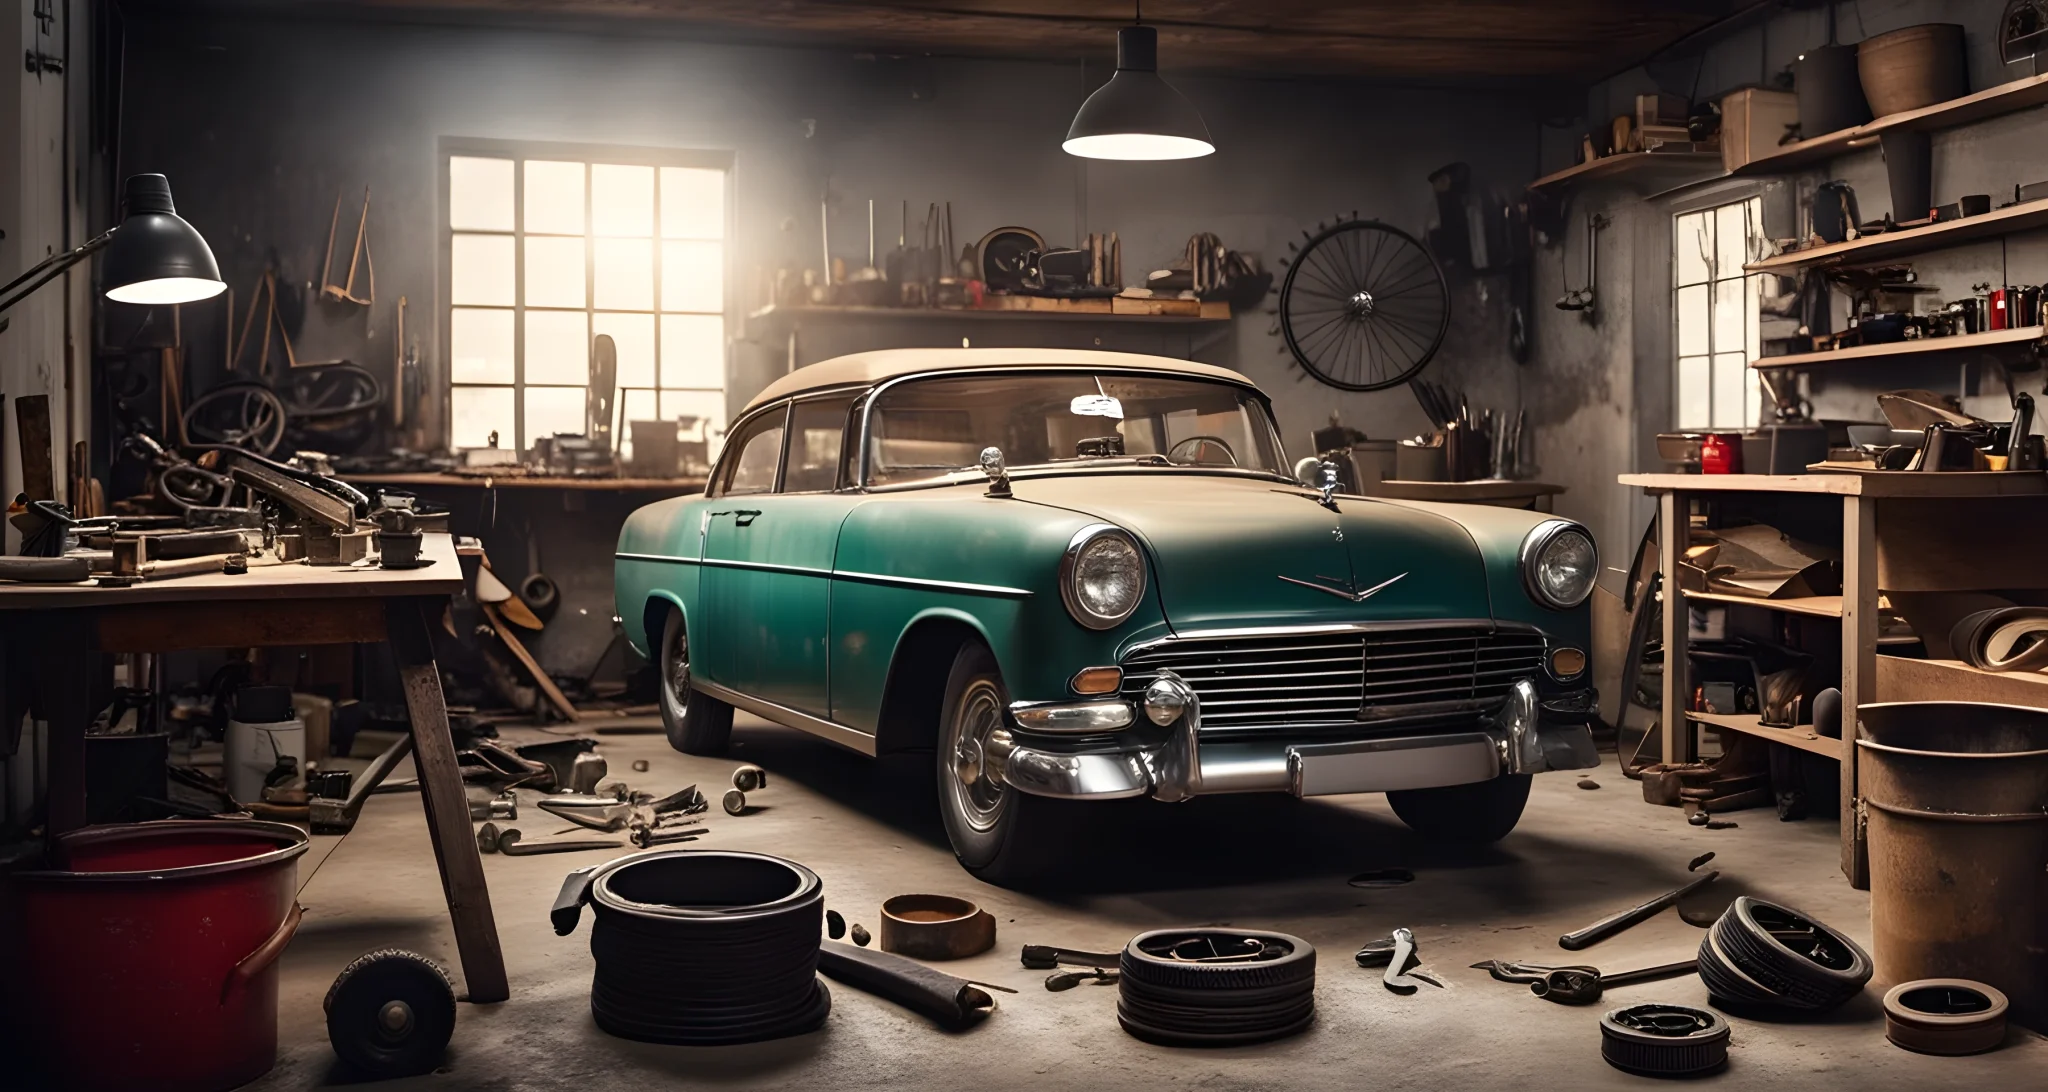 The image features a vintage classic car being restored in a garage workshop. Tools and various car parts are scattered around the car.